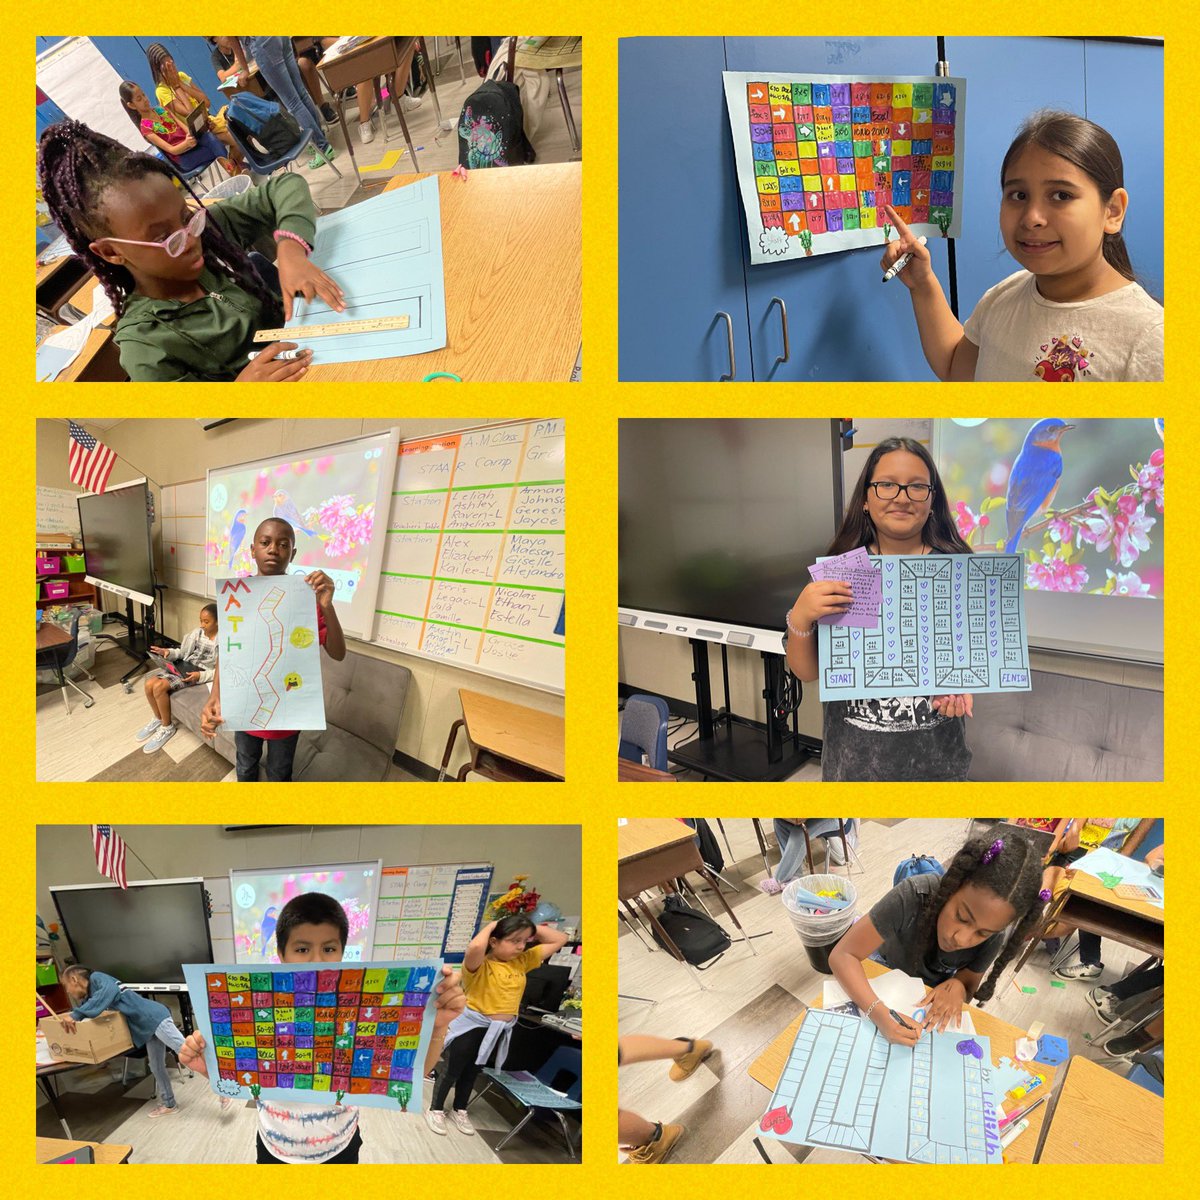 Ms. Borito’s future mathematicians designing Math Game Boards! What a fun way to end the week!
#4thGrade